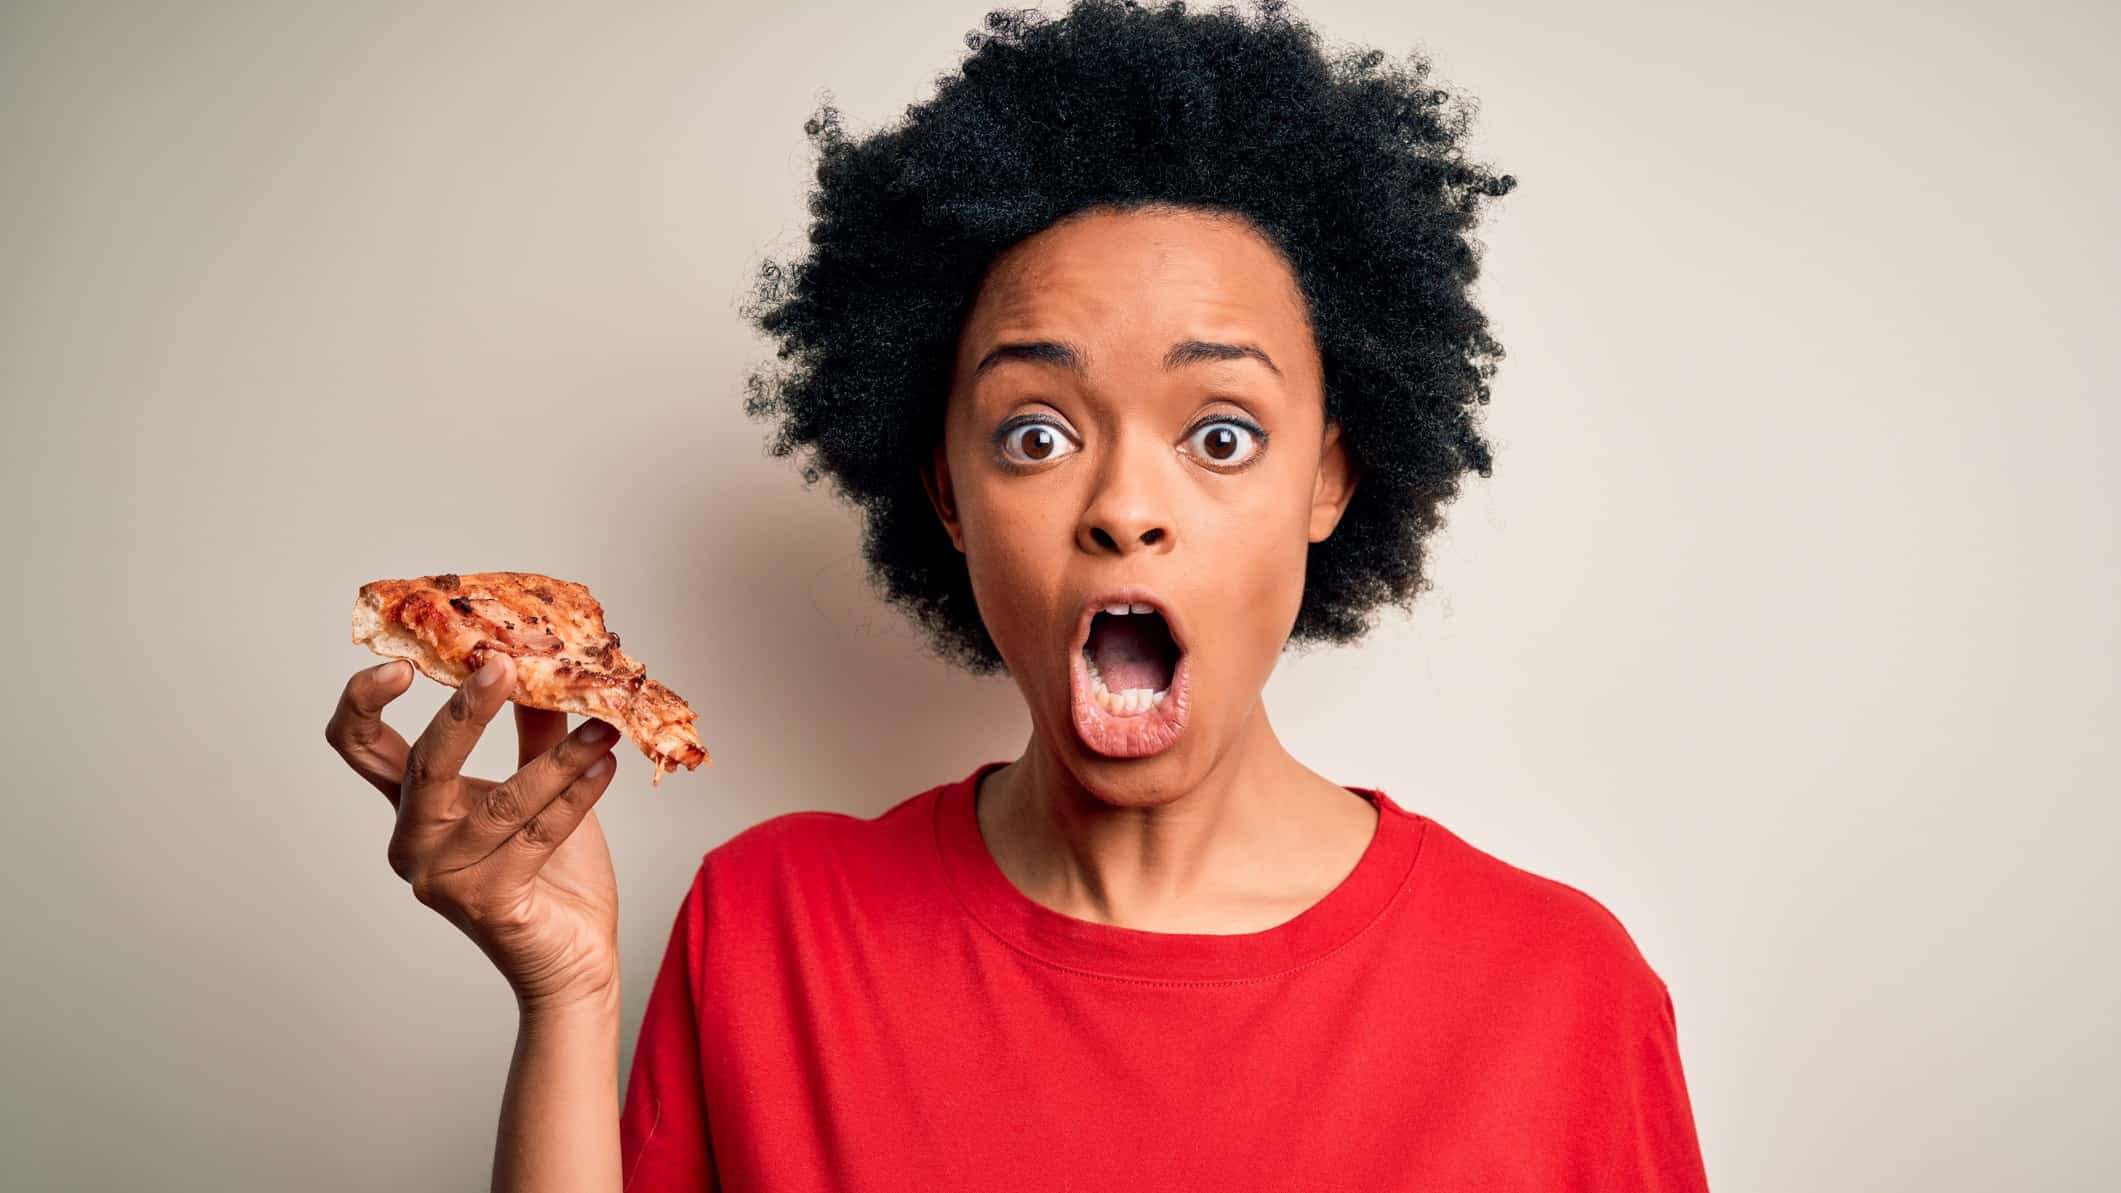 A woman holds a piece of pizza in one hand and has a shocked look on her face.